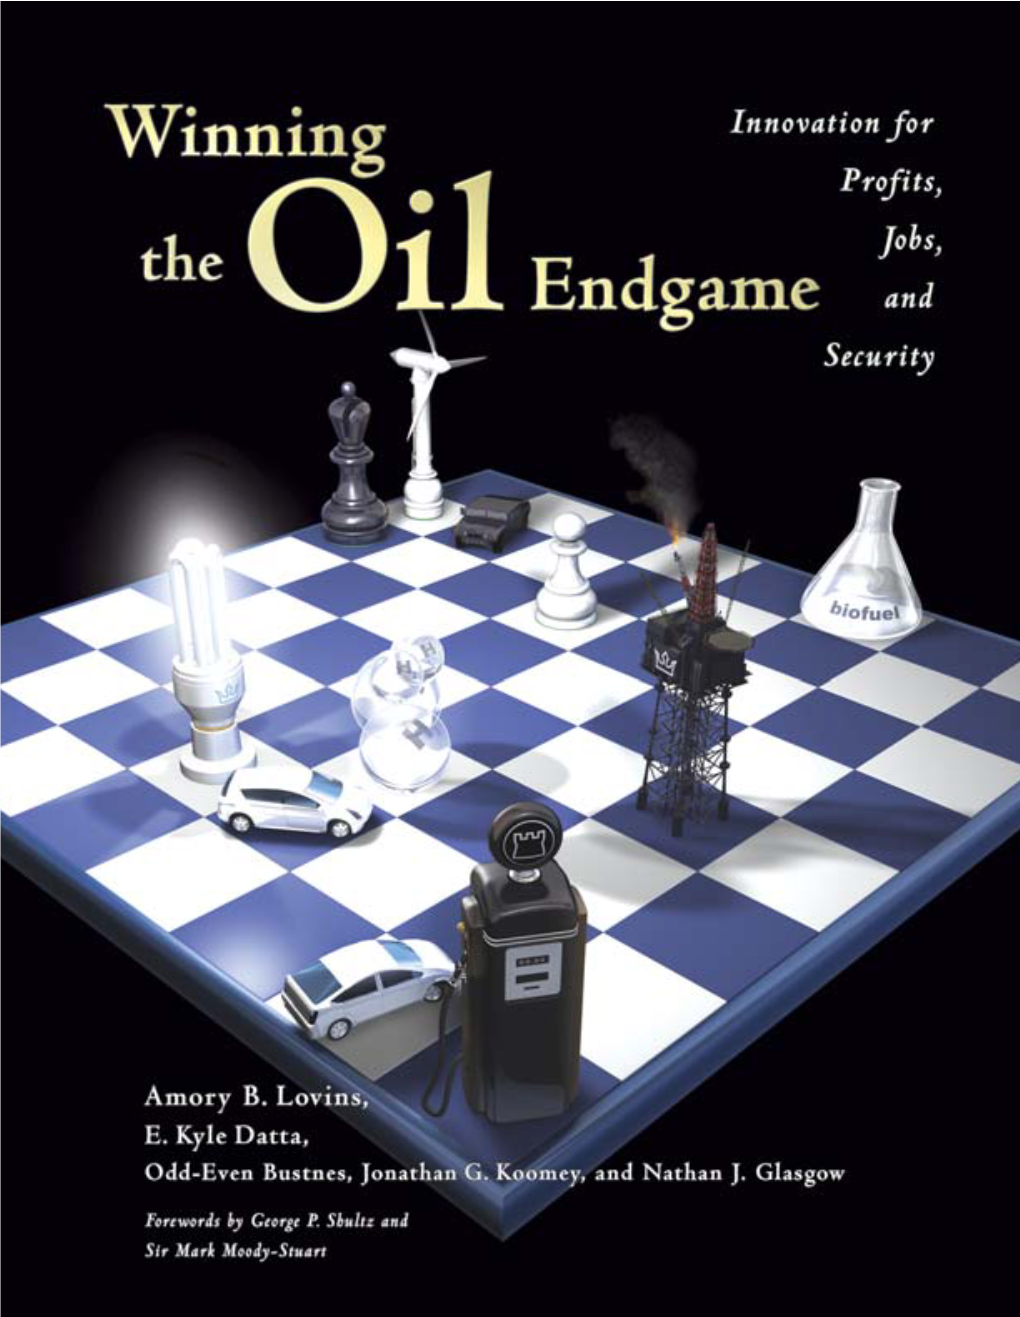 Winning the Oil Endgame Overview Contents